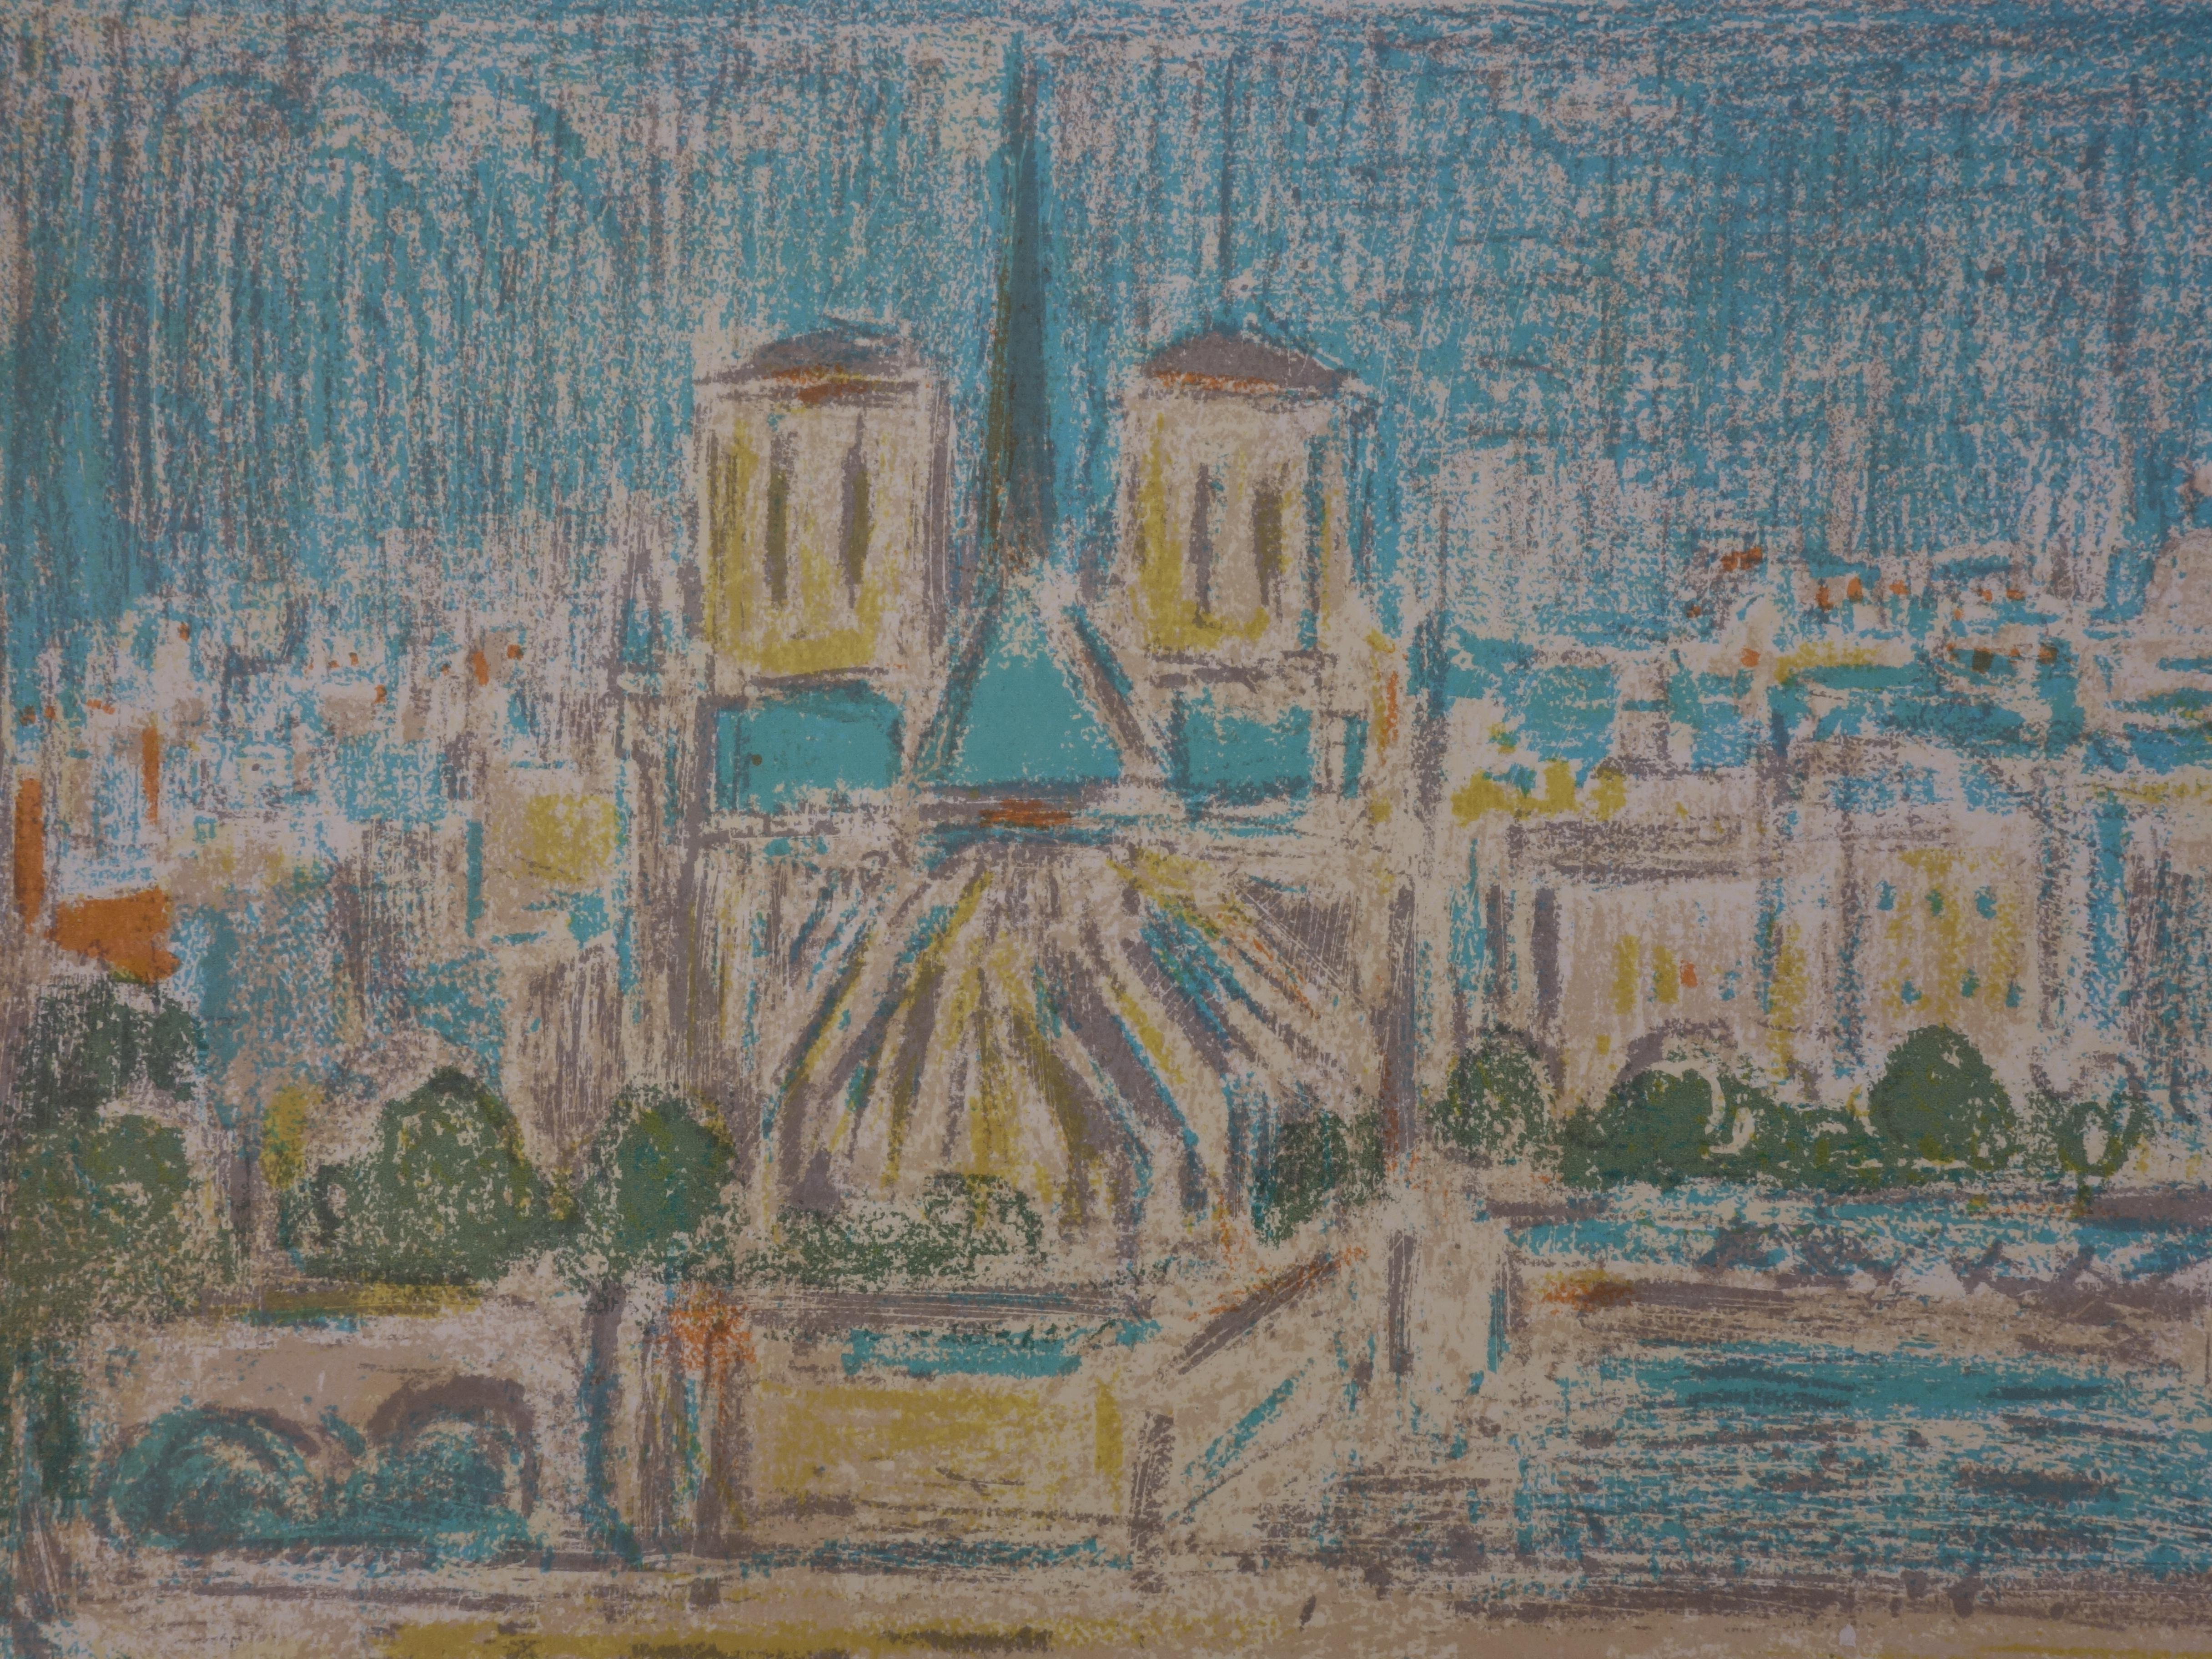 Paris : Notre Dame Viewed from the Seine - Handsigned lithograph (Mourlot 1973) - Modern Print by André Cottavoz